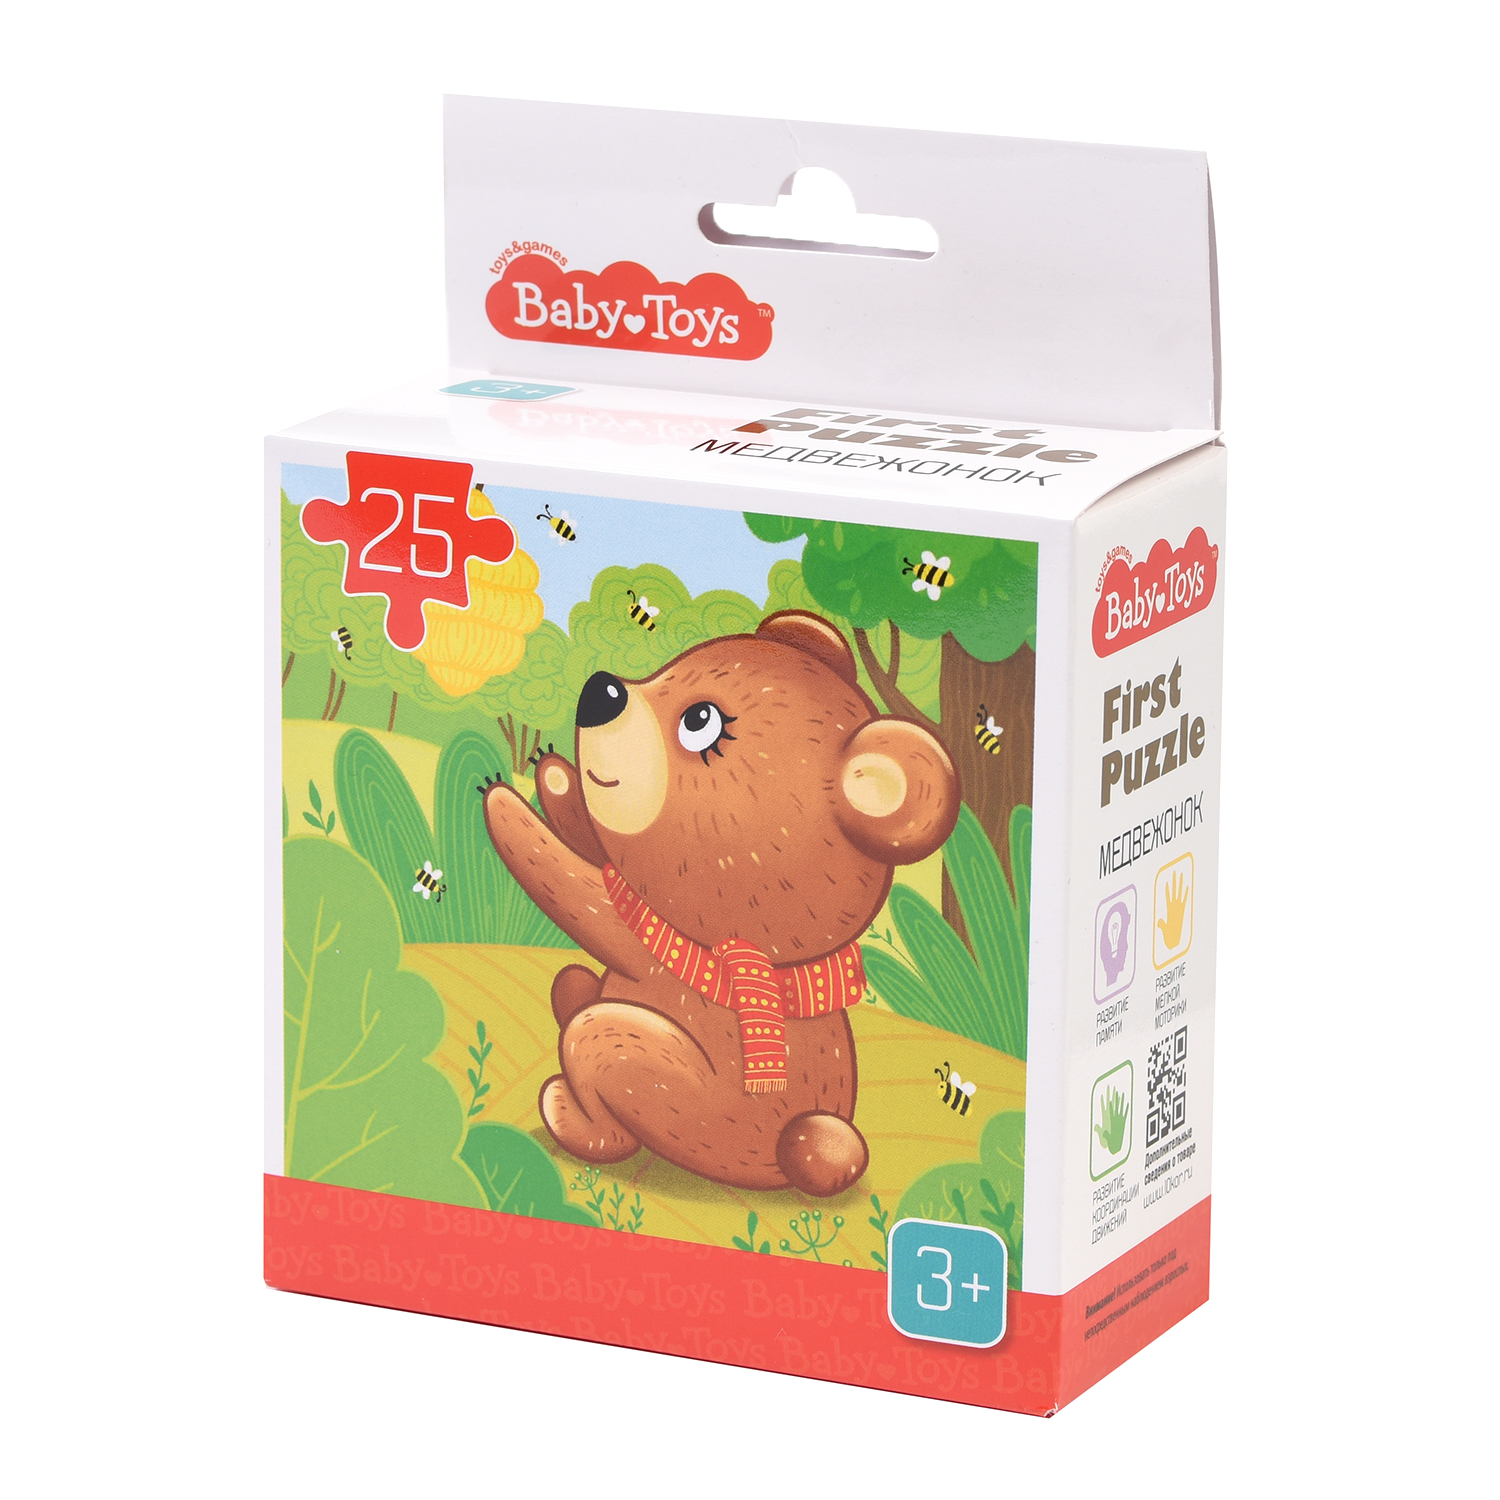 Пазл Baby Toys First Puzzle Медвежонок 25элементов 04291 - фото 1